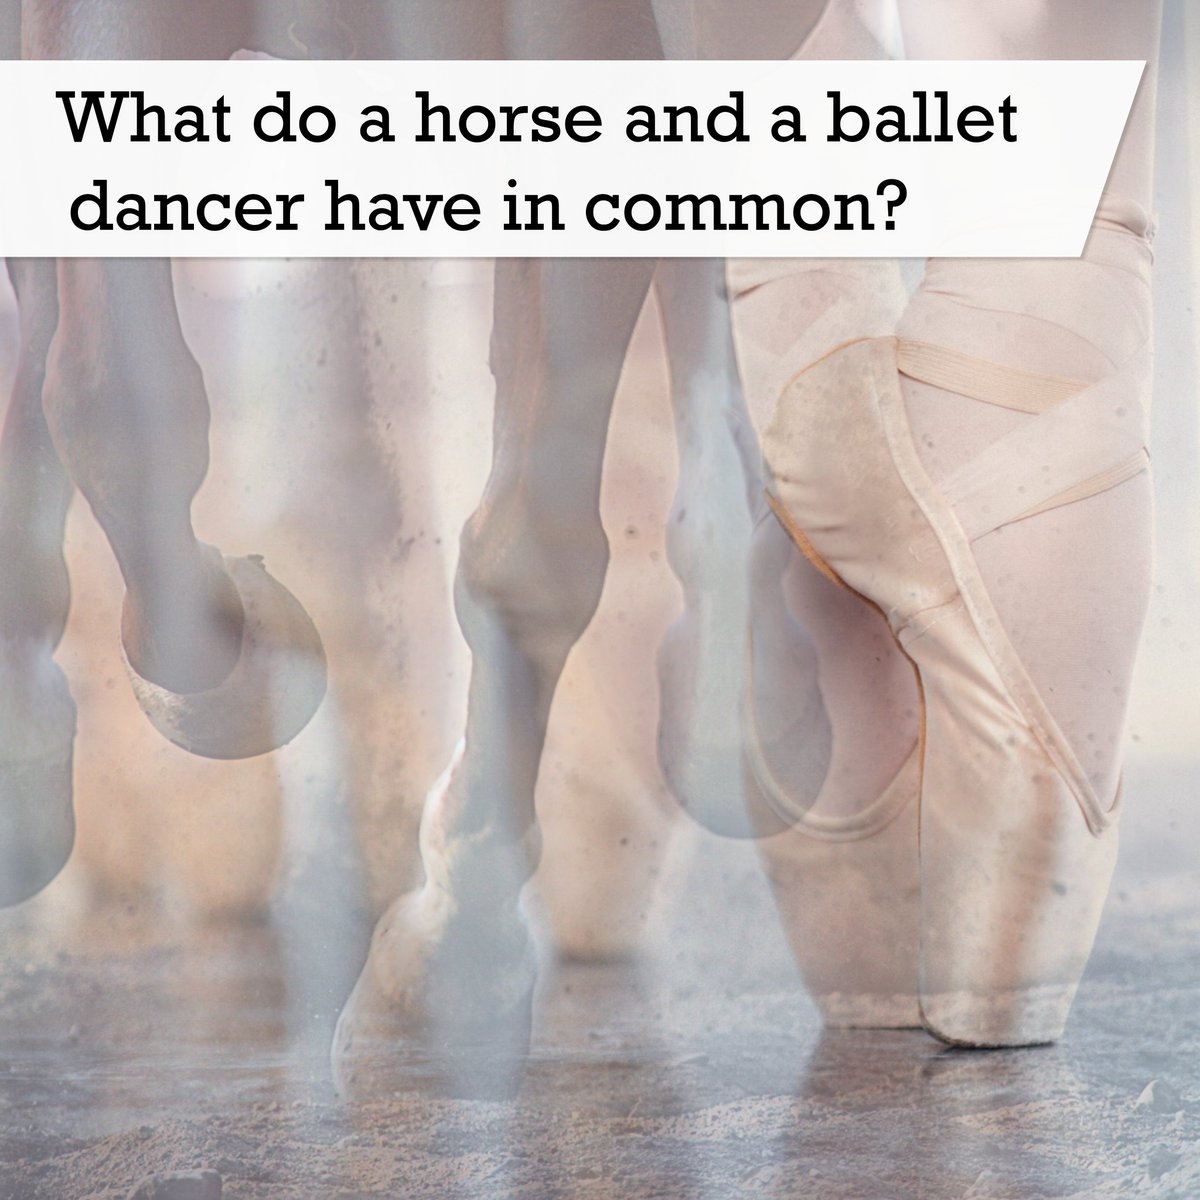 What do a horse and a ballet dancer have in common?

(Answer will be posted in the comments)
#anatomyfacts #comparativeanatomy